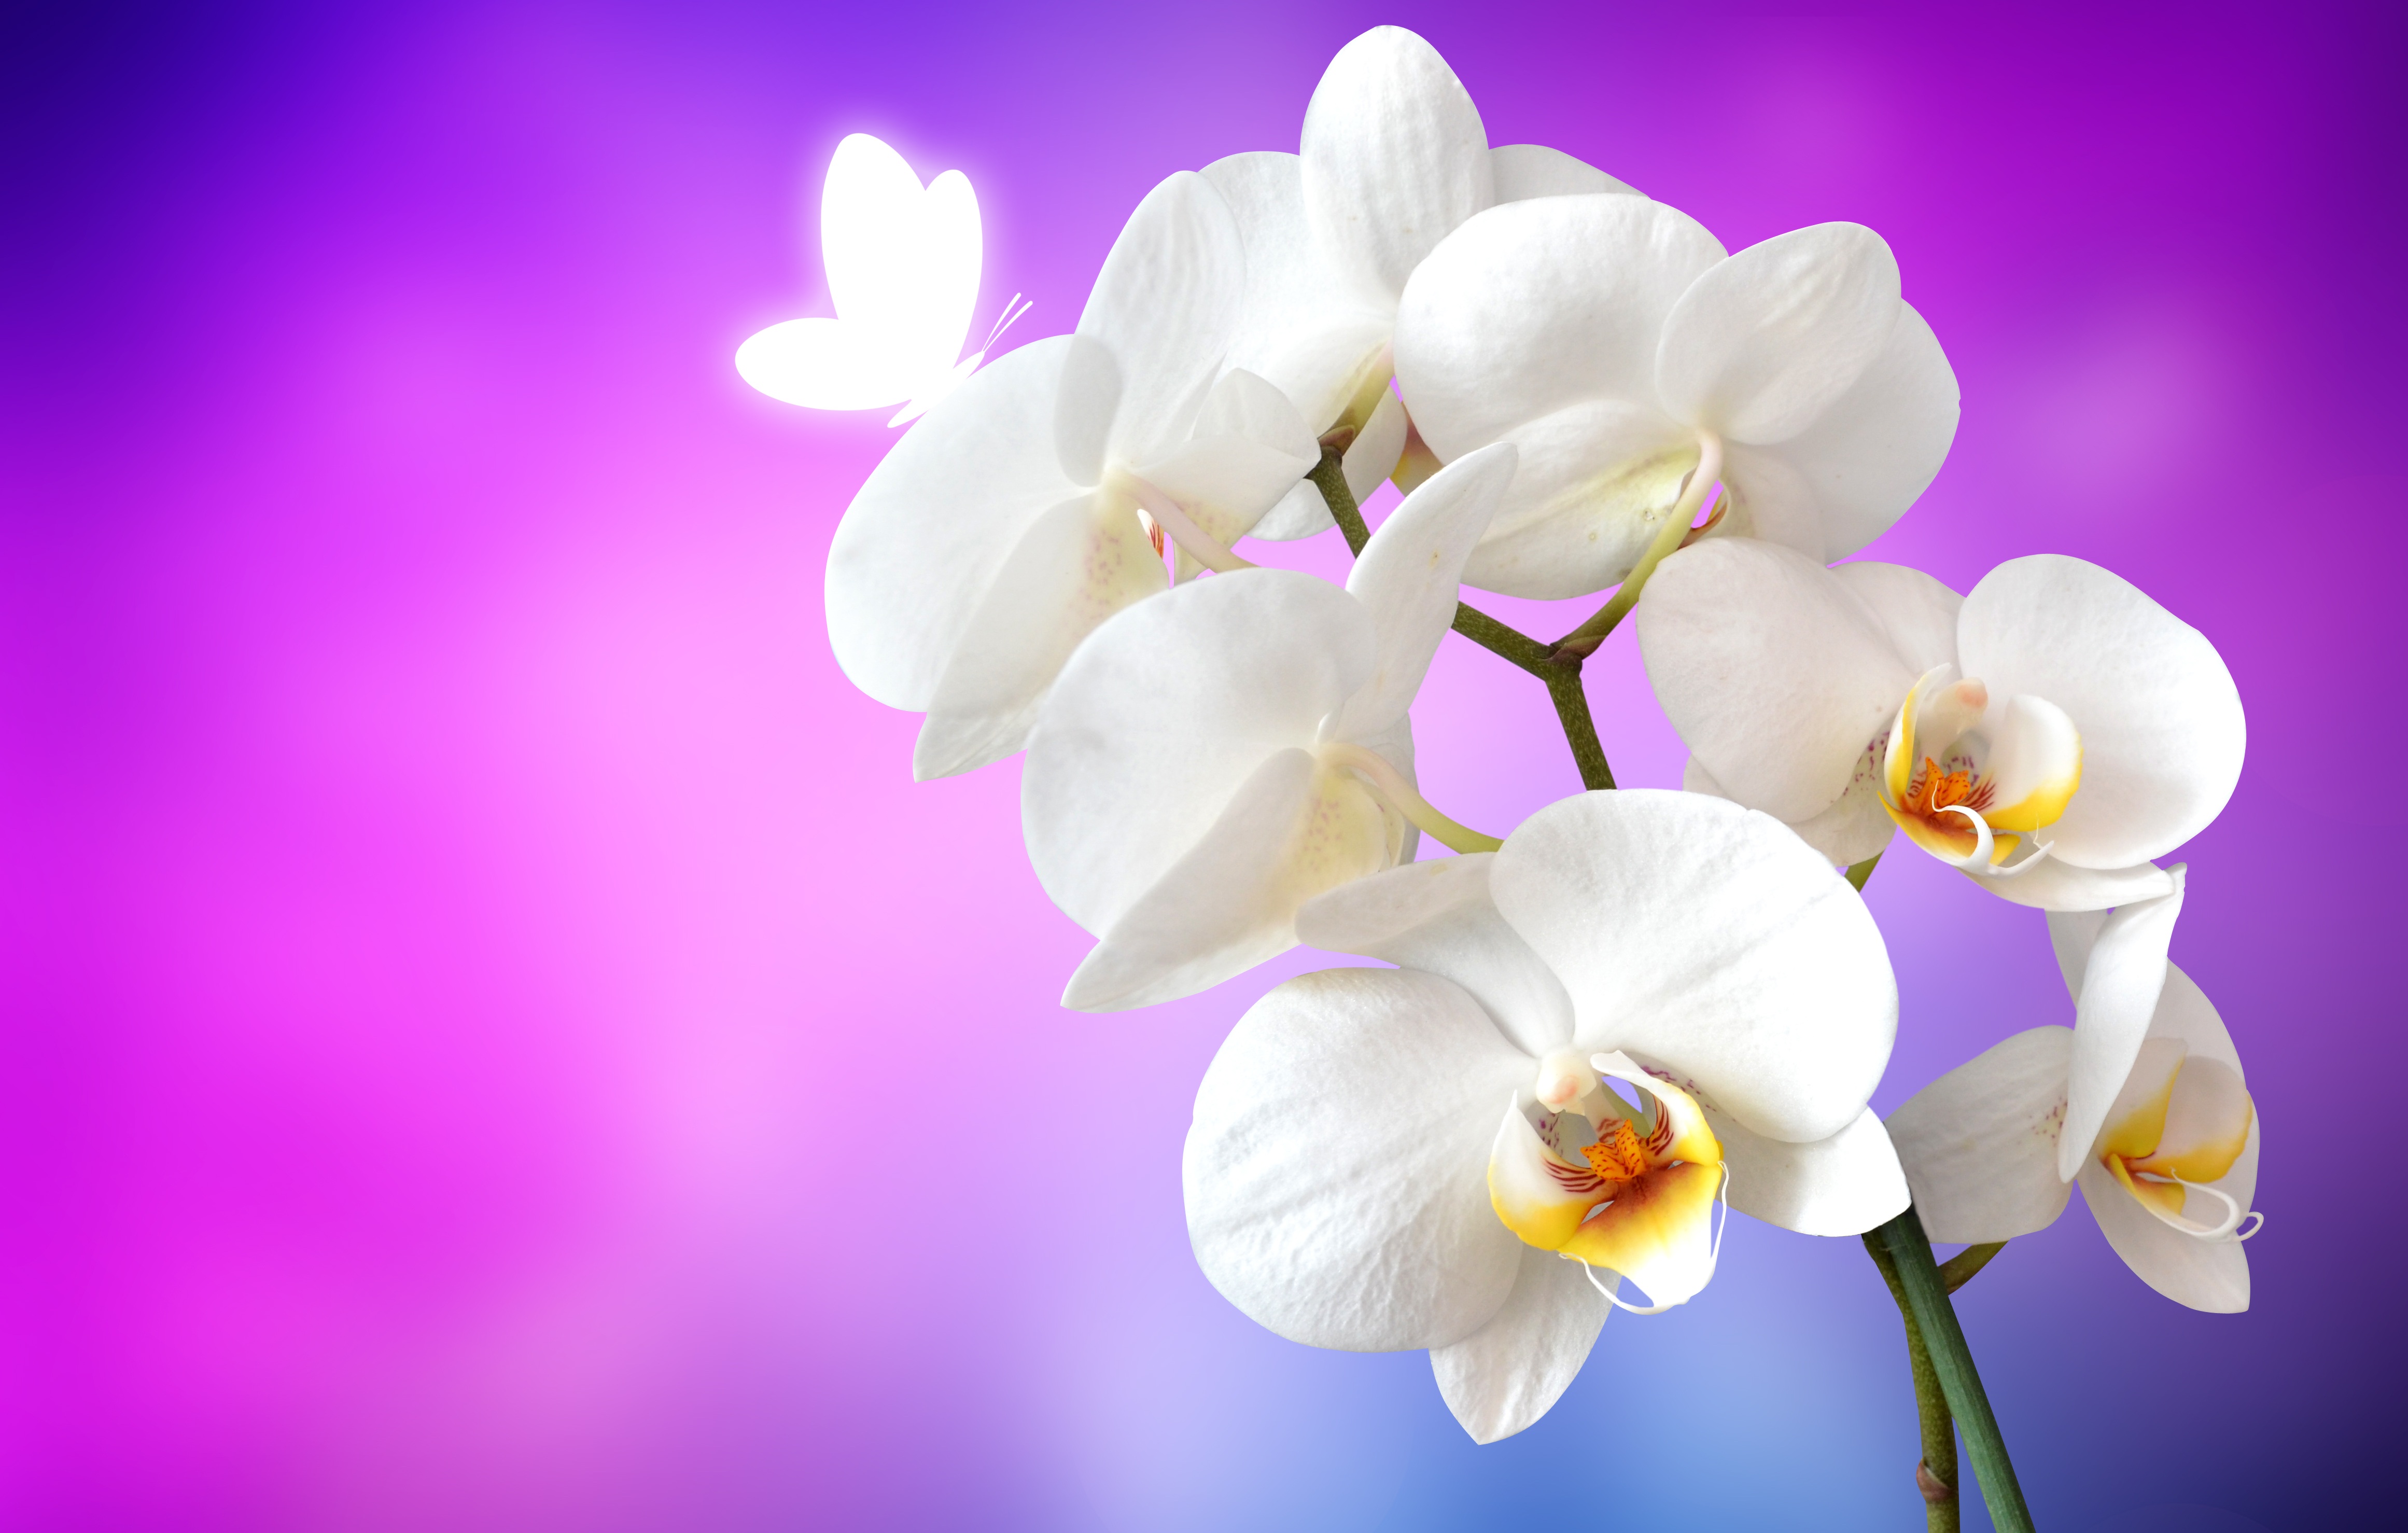 Orchid flowers Wallpaper 4K, White Orchids, Pink ...